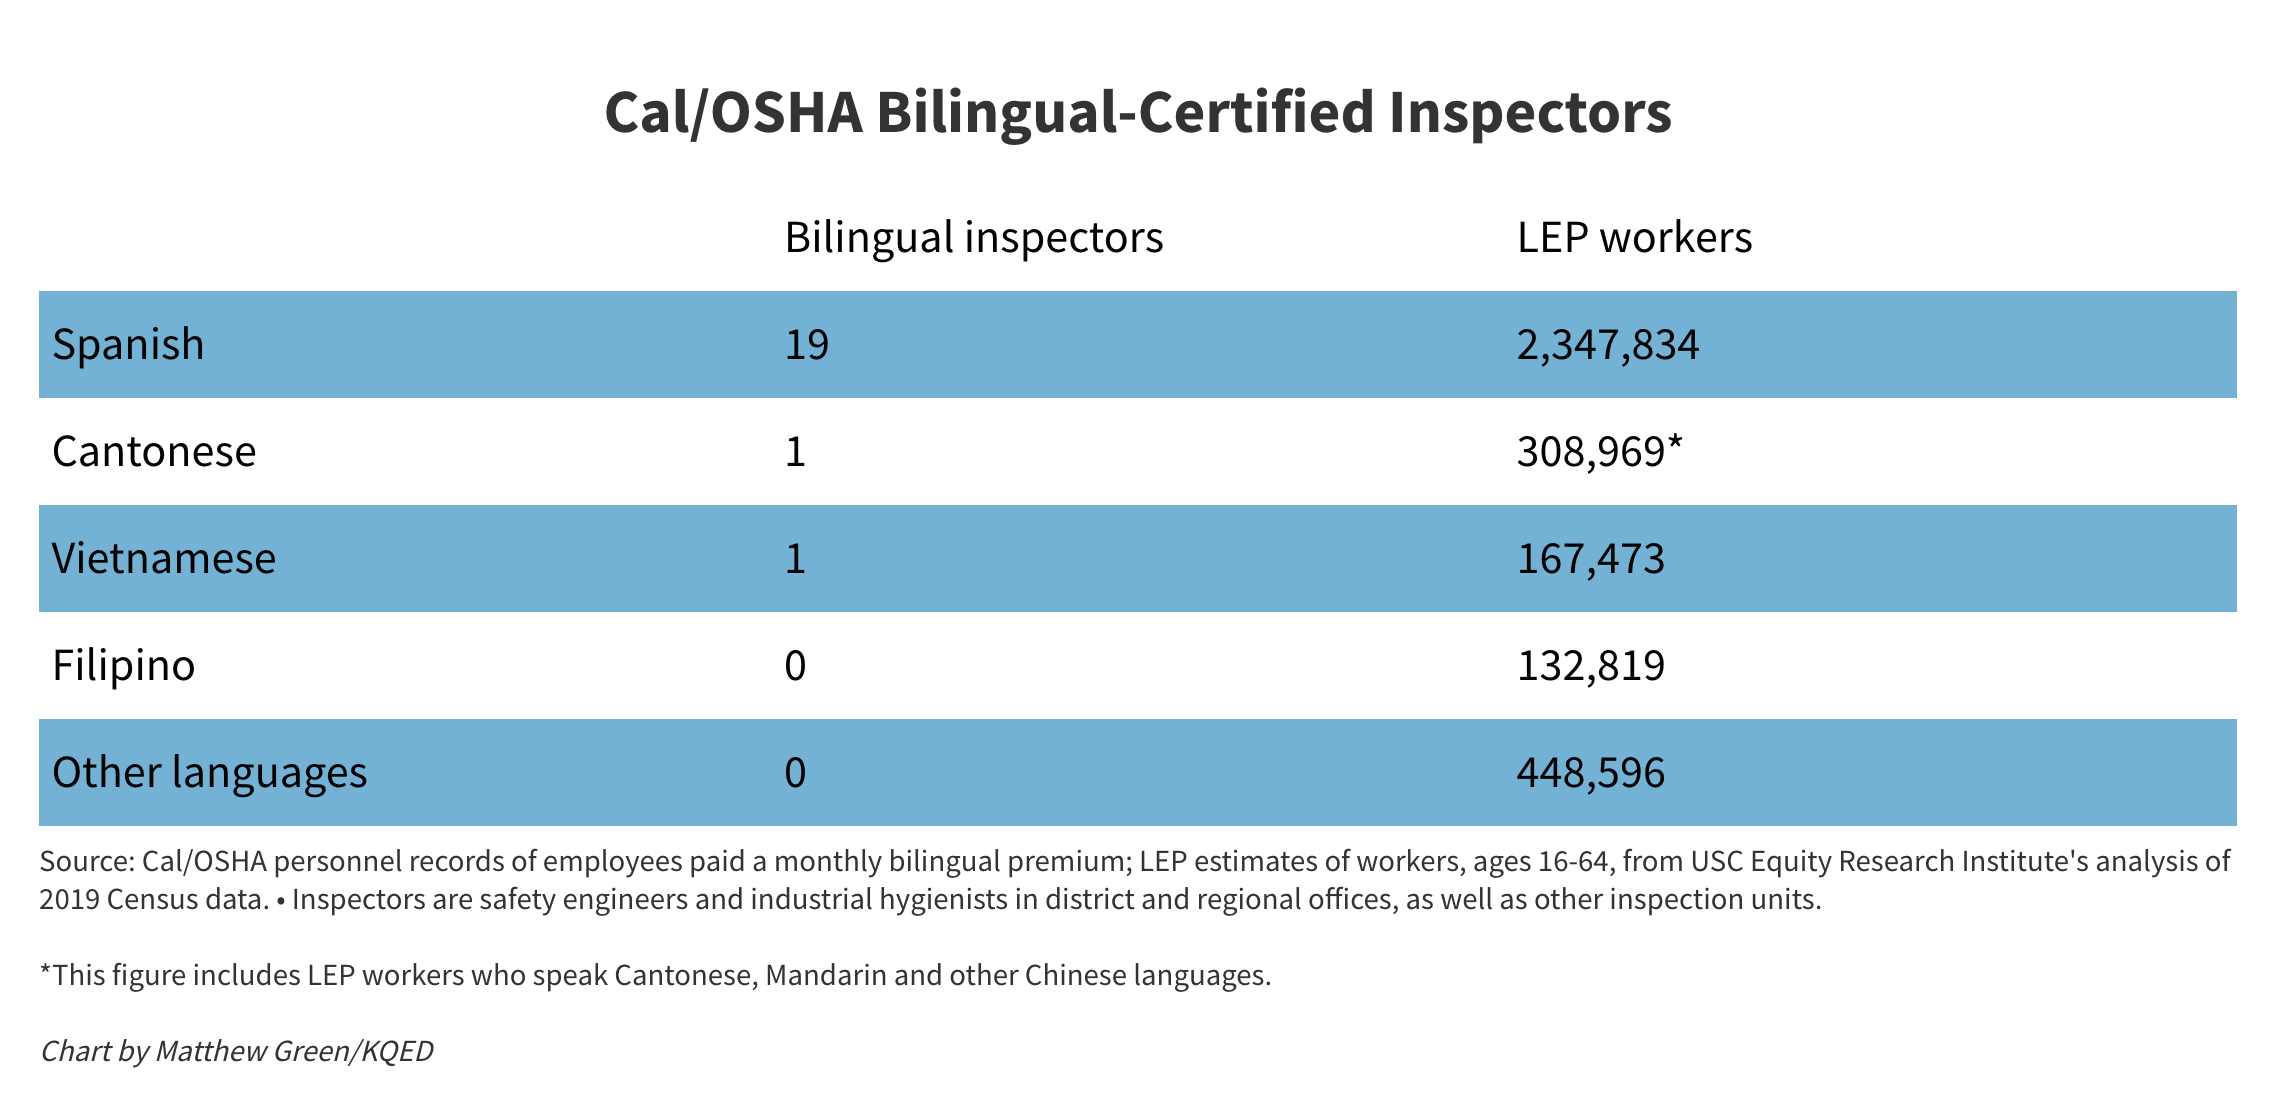 A table showing the number of Cal/OSHA bilingual-certified inspectors and the estimated number of LEP workers.